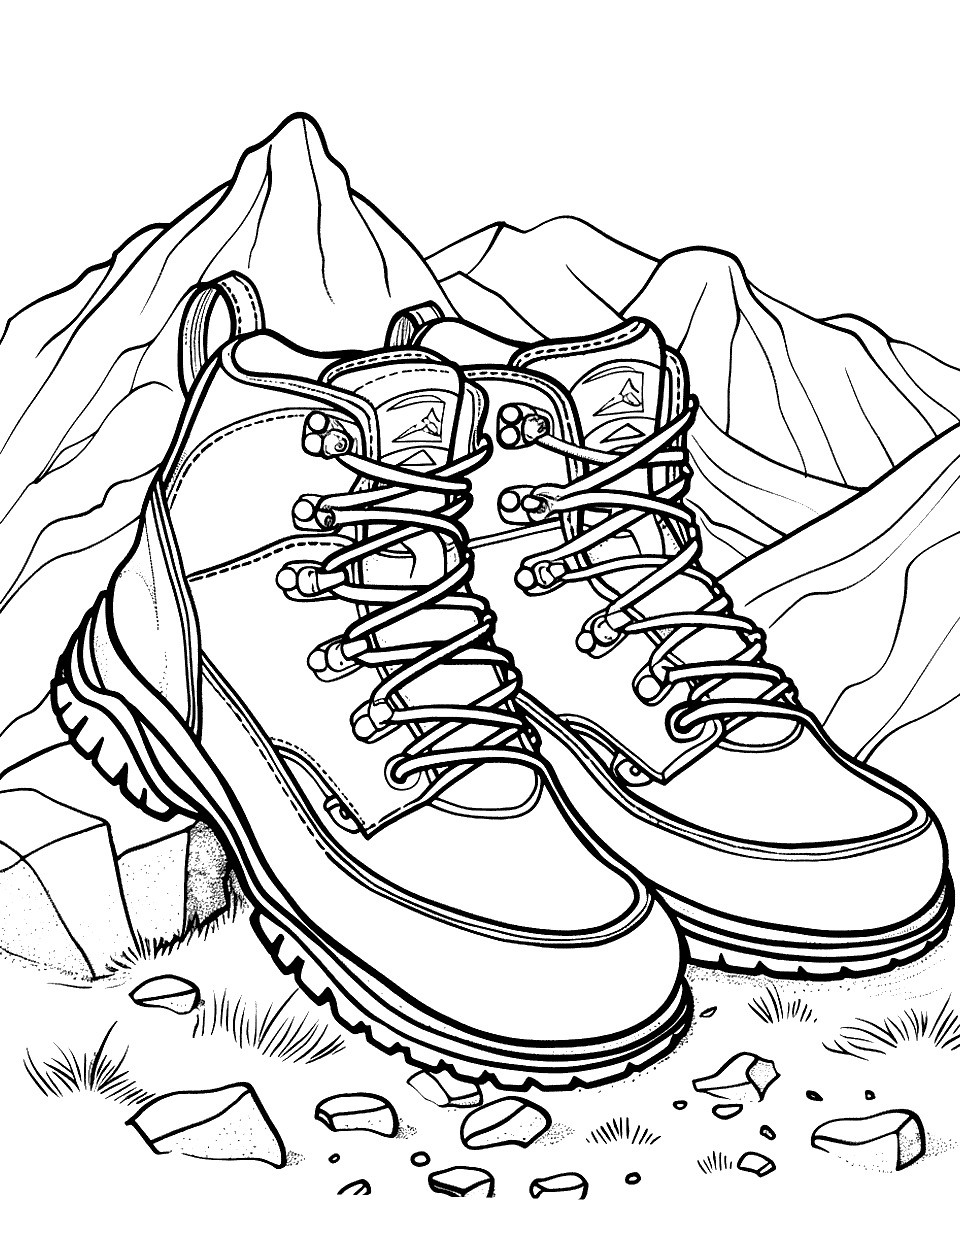 Hiking Boots on a Mountain Trail Shoe Coloring Page - Rugged hiking boots set against a simple trail with mountain outlines in the far distance.